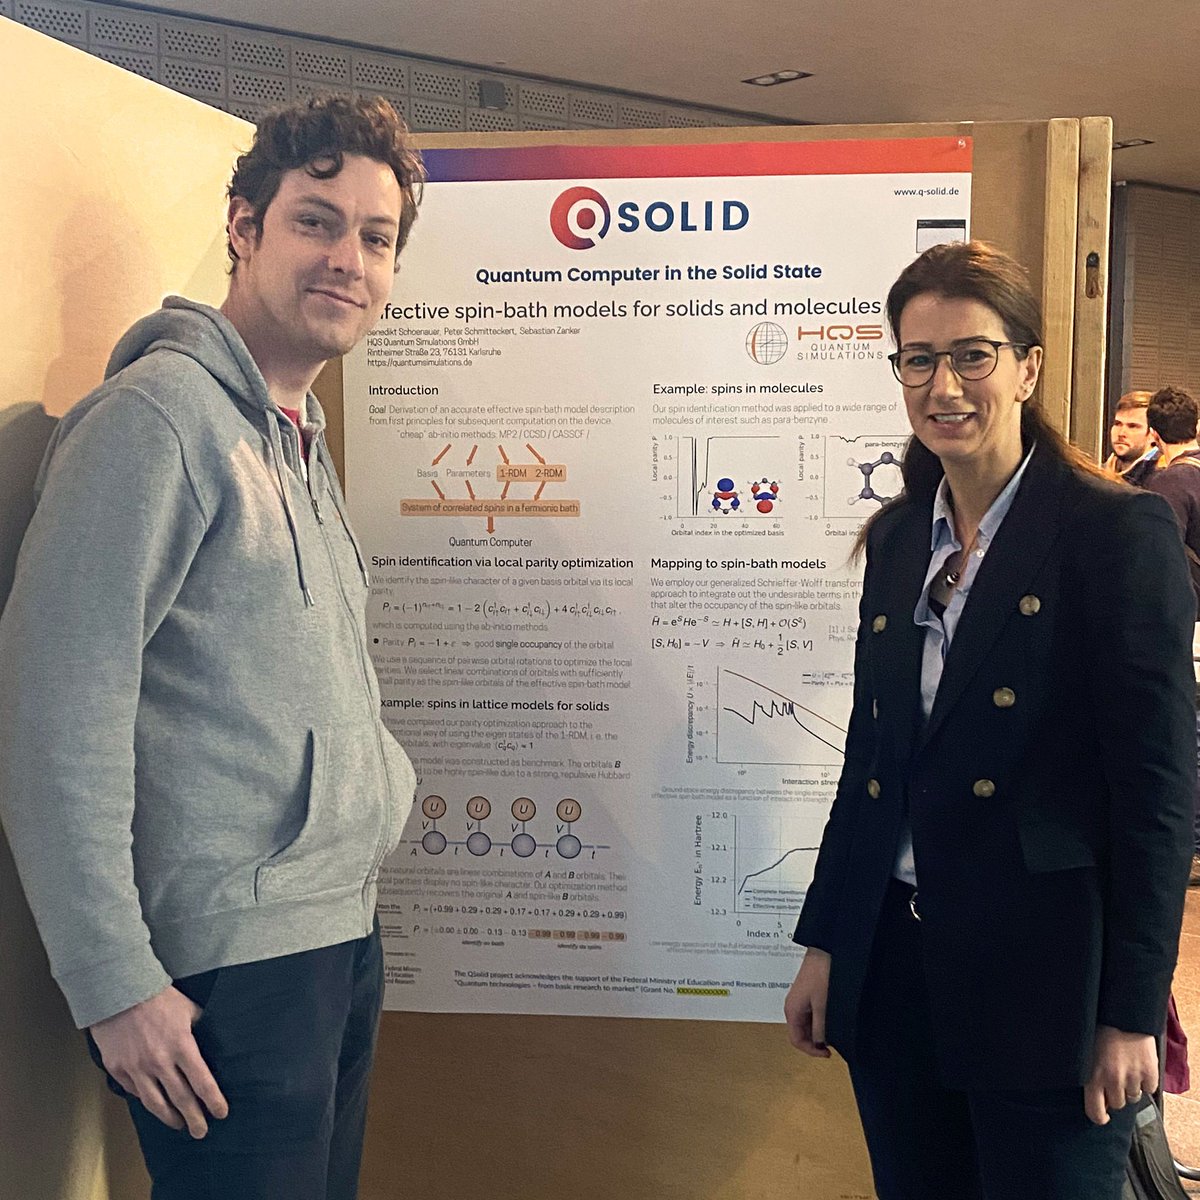 HQS @ the 4th #QSolid Collaborative meeting: It was a great pleasure to exchange ideas with our project partners and to present our latest results on the description of #spinphysics in #molecules. #postersession @QSolid_DE #quantumsimulation